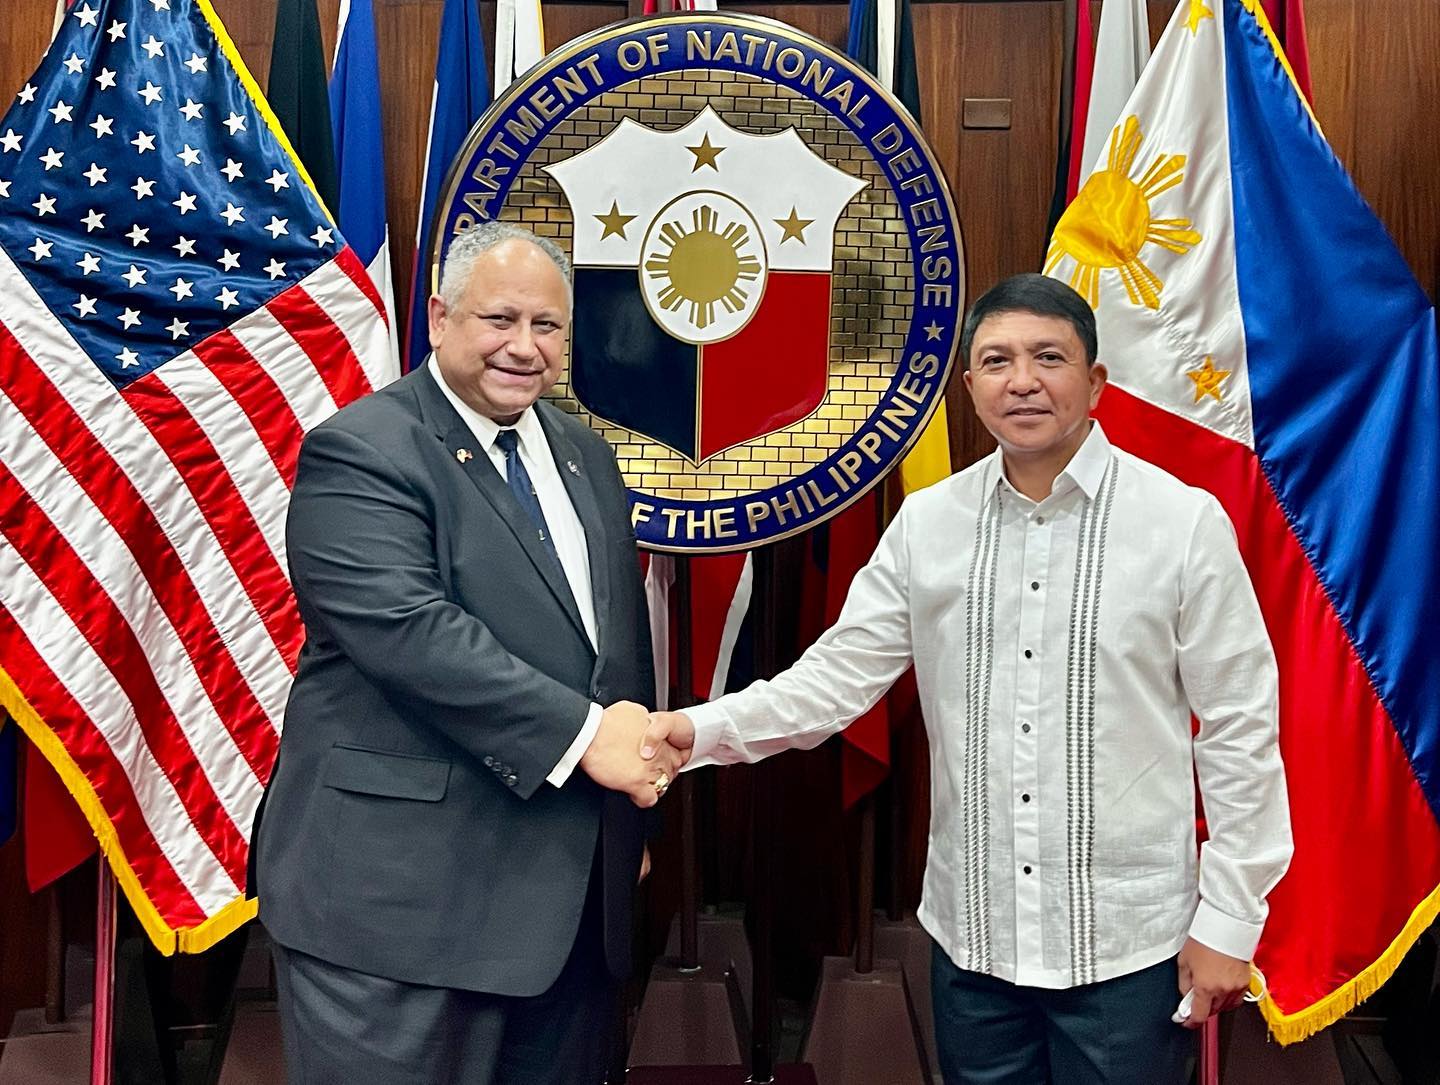 US Secretary of the Navy Carlos del Toro anf DND Undersecretary Franco Nemesio Gacal shaking hands for a picture